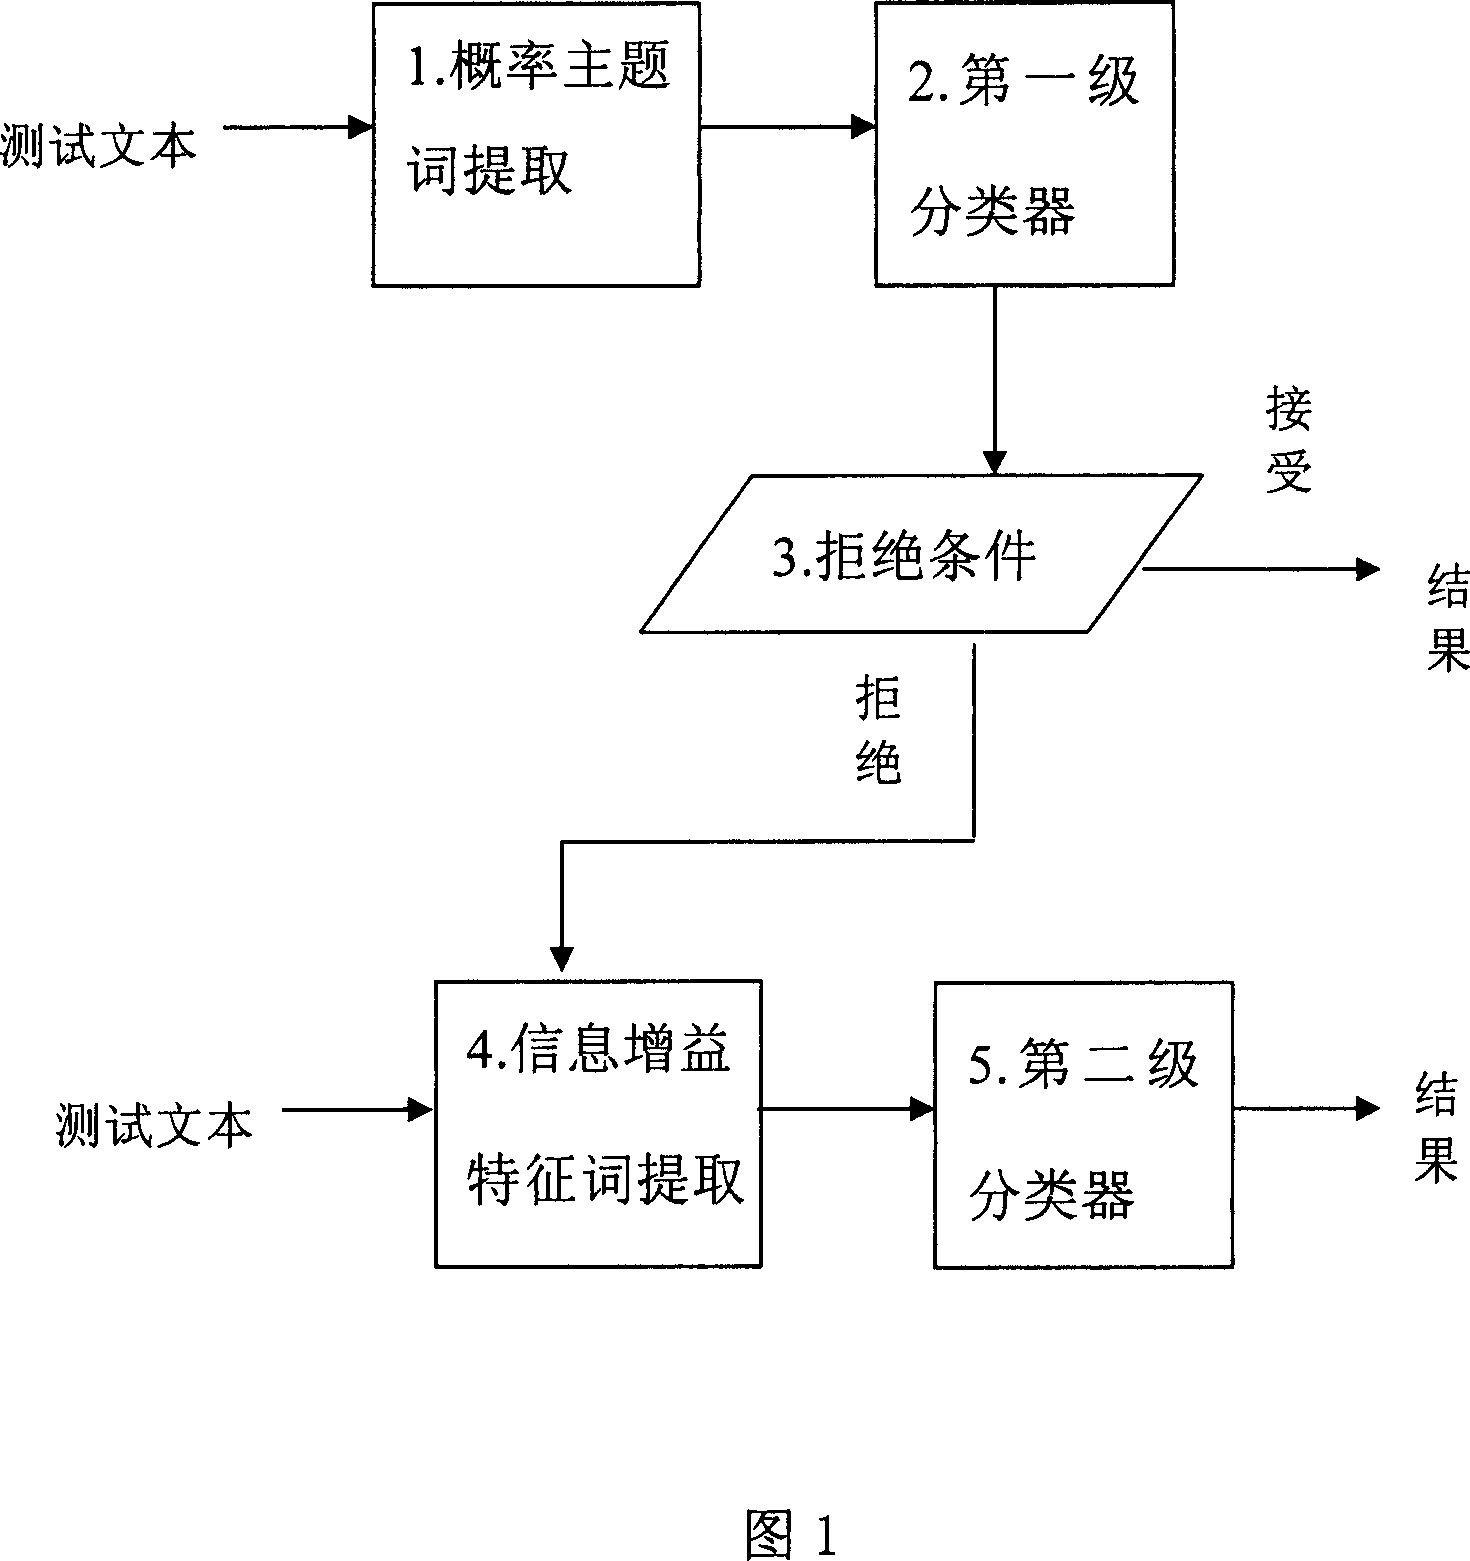 Two-stage combined file classification method based on probability subject